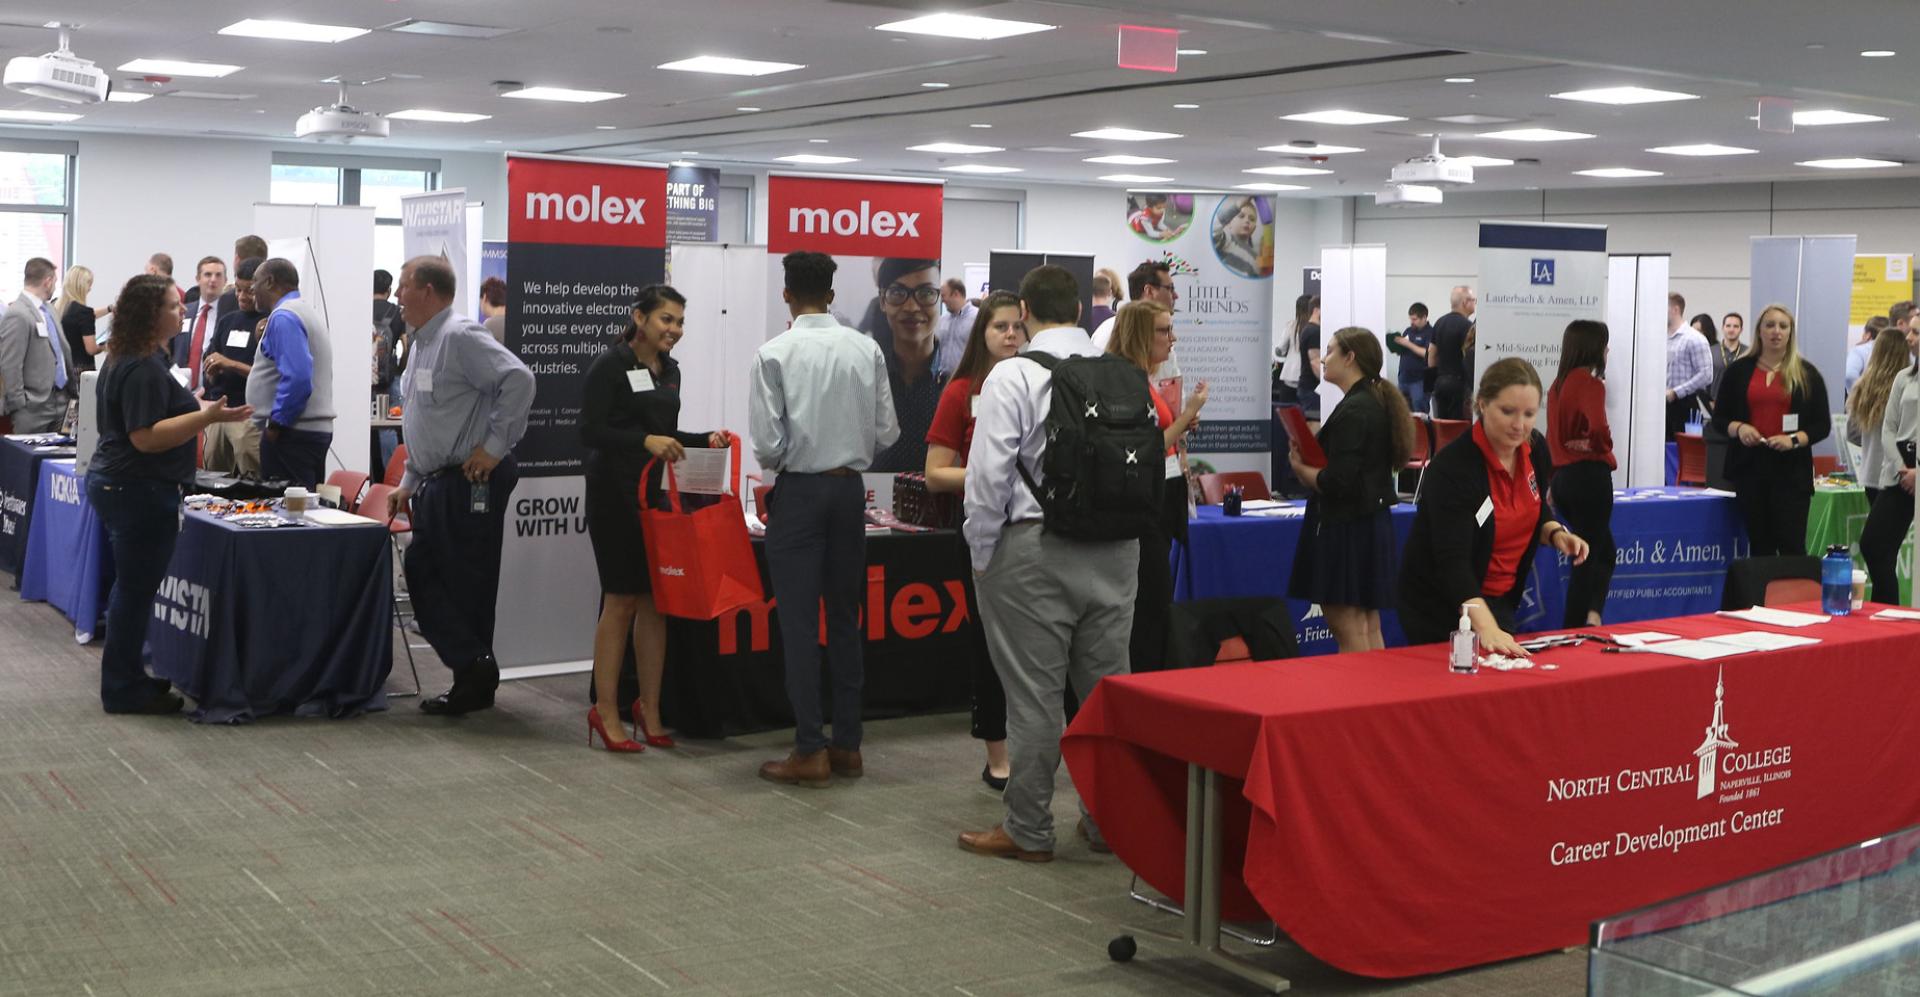 Students line up to meet companies at an event, looking for post-college careers.